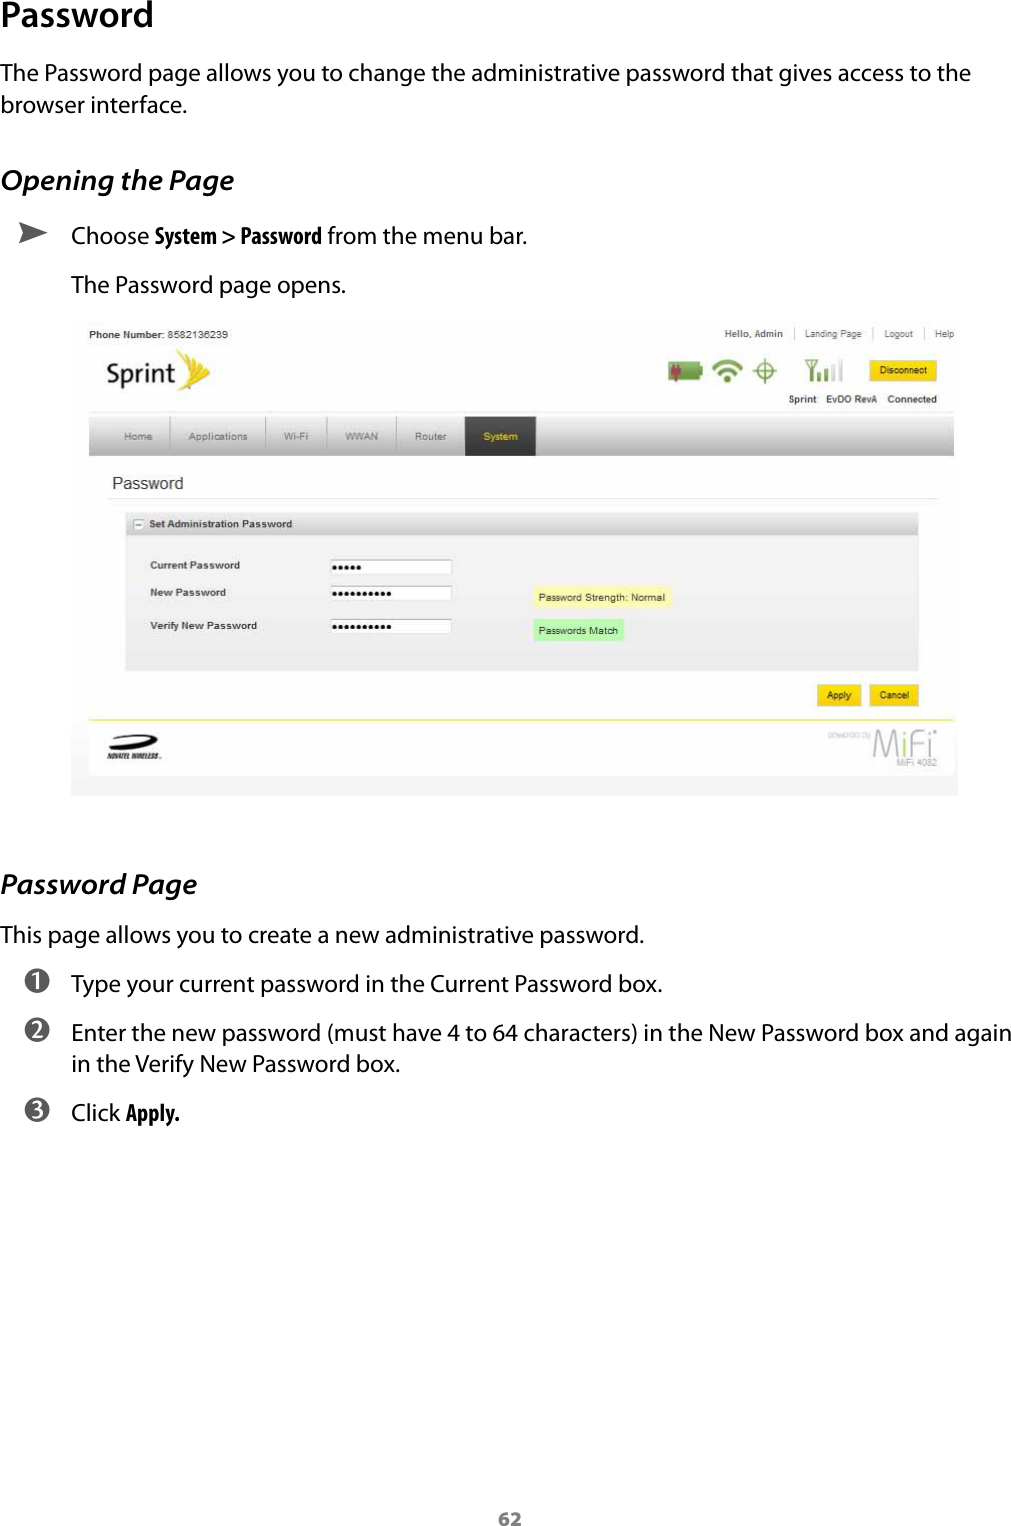 62PasswordThe Password page allows you to change the administrative password that gives access to the browser interface.Opening the Page ➤ Choose System &gt; Password from the menu bar.The Password page opens.Password PageThis page allows you to create a new administrative password.  ➊ Type your current password in the Current Password box. ➋ Enter the new password (must have 4 to 64 characters) in the New Password box and again in the Verify New Password box. ➌ Click Apply.